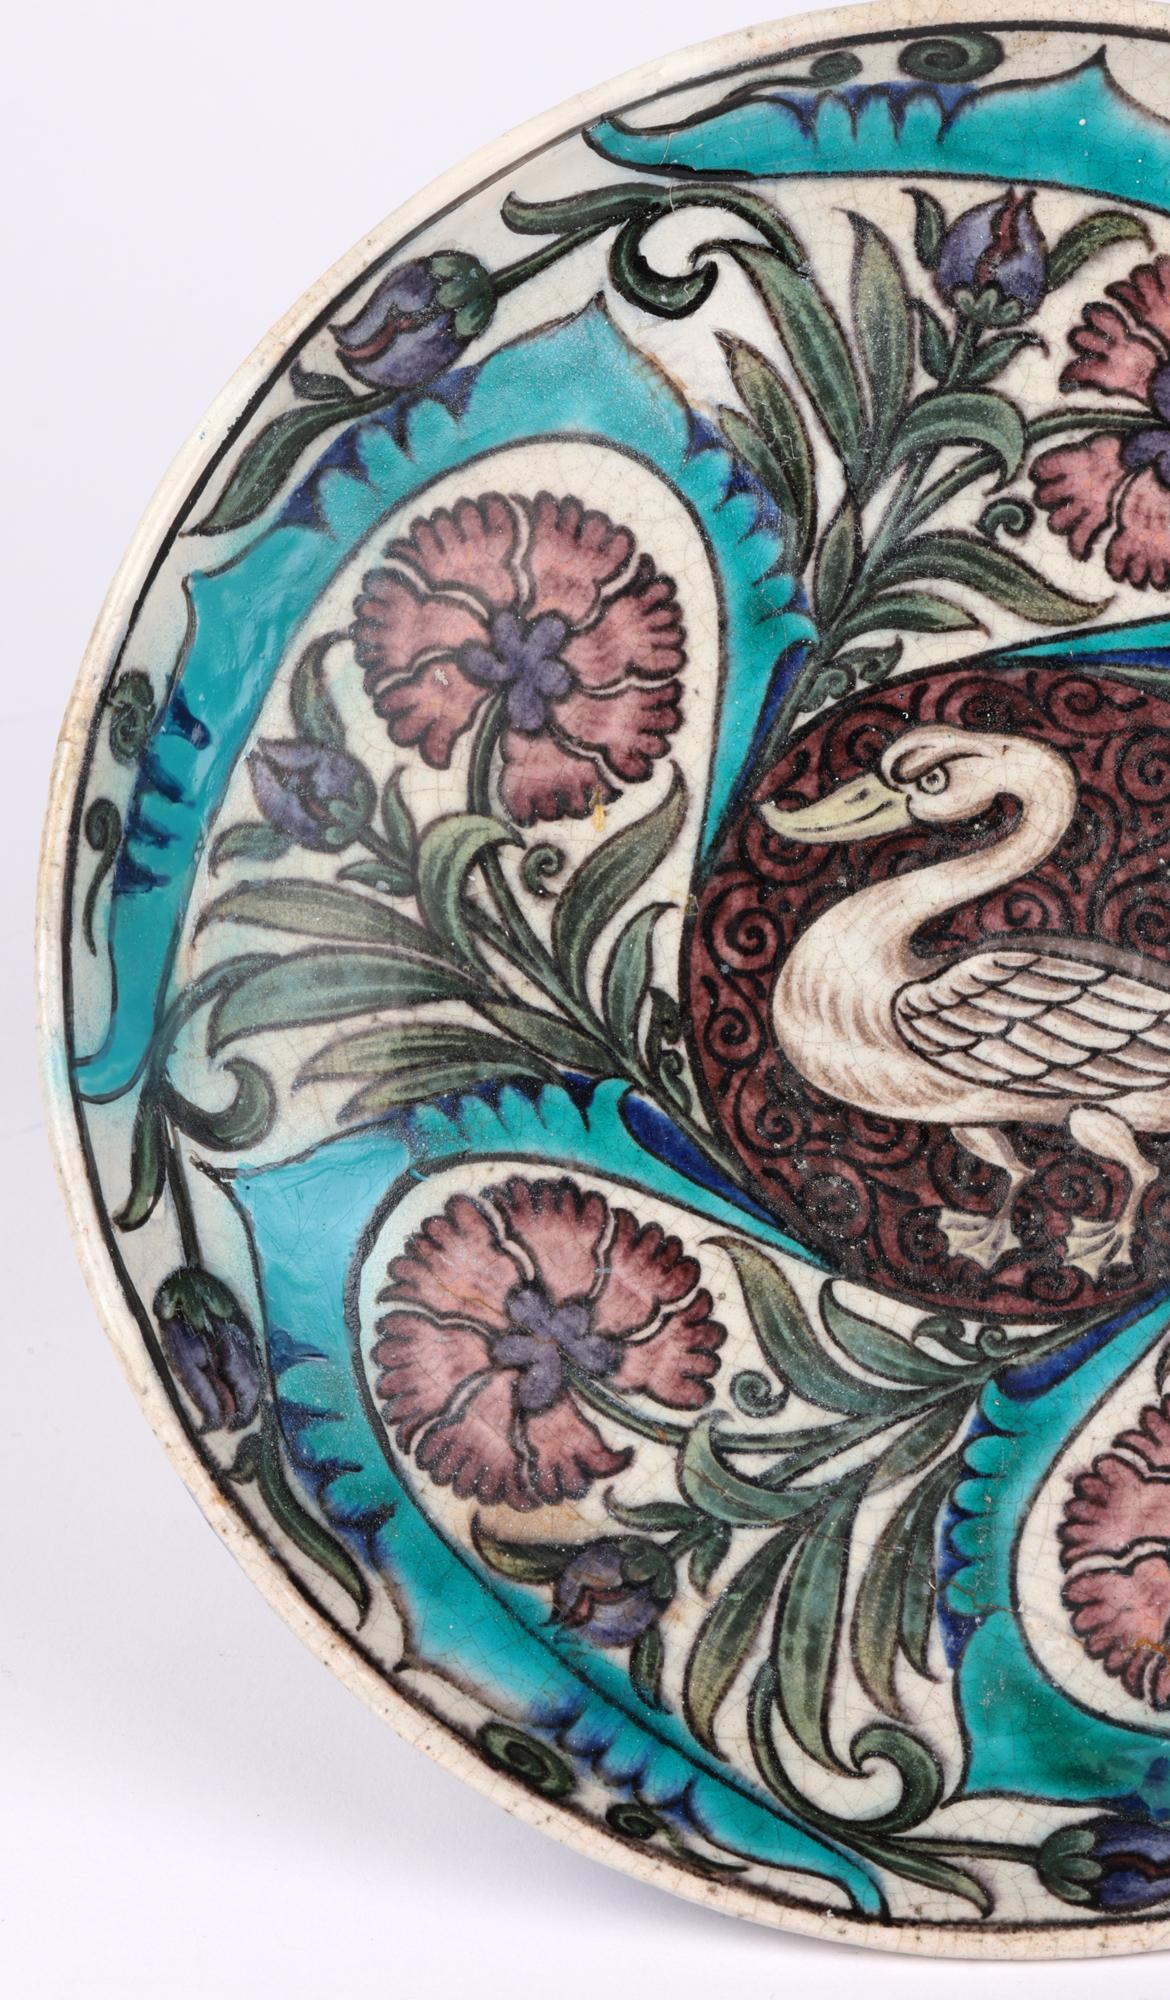 Rare Arts & Crafts Earthenware Persian Style Dish Hand Painted with a Swan 1